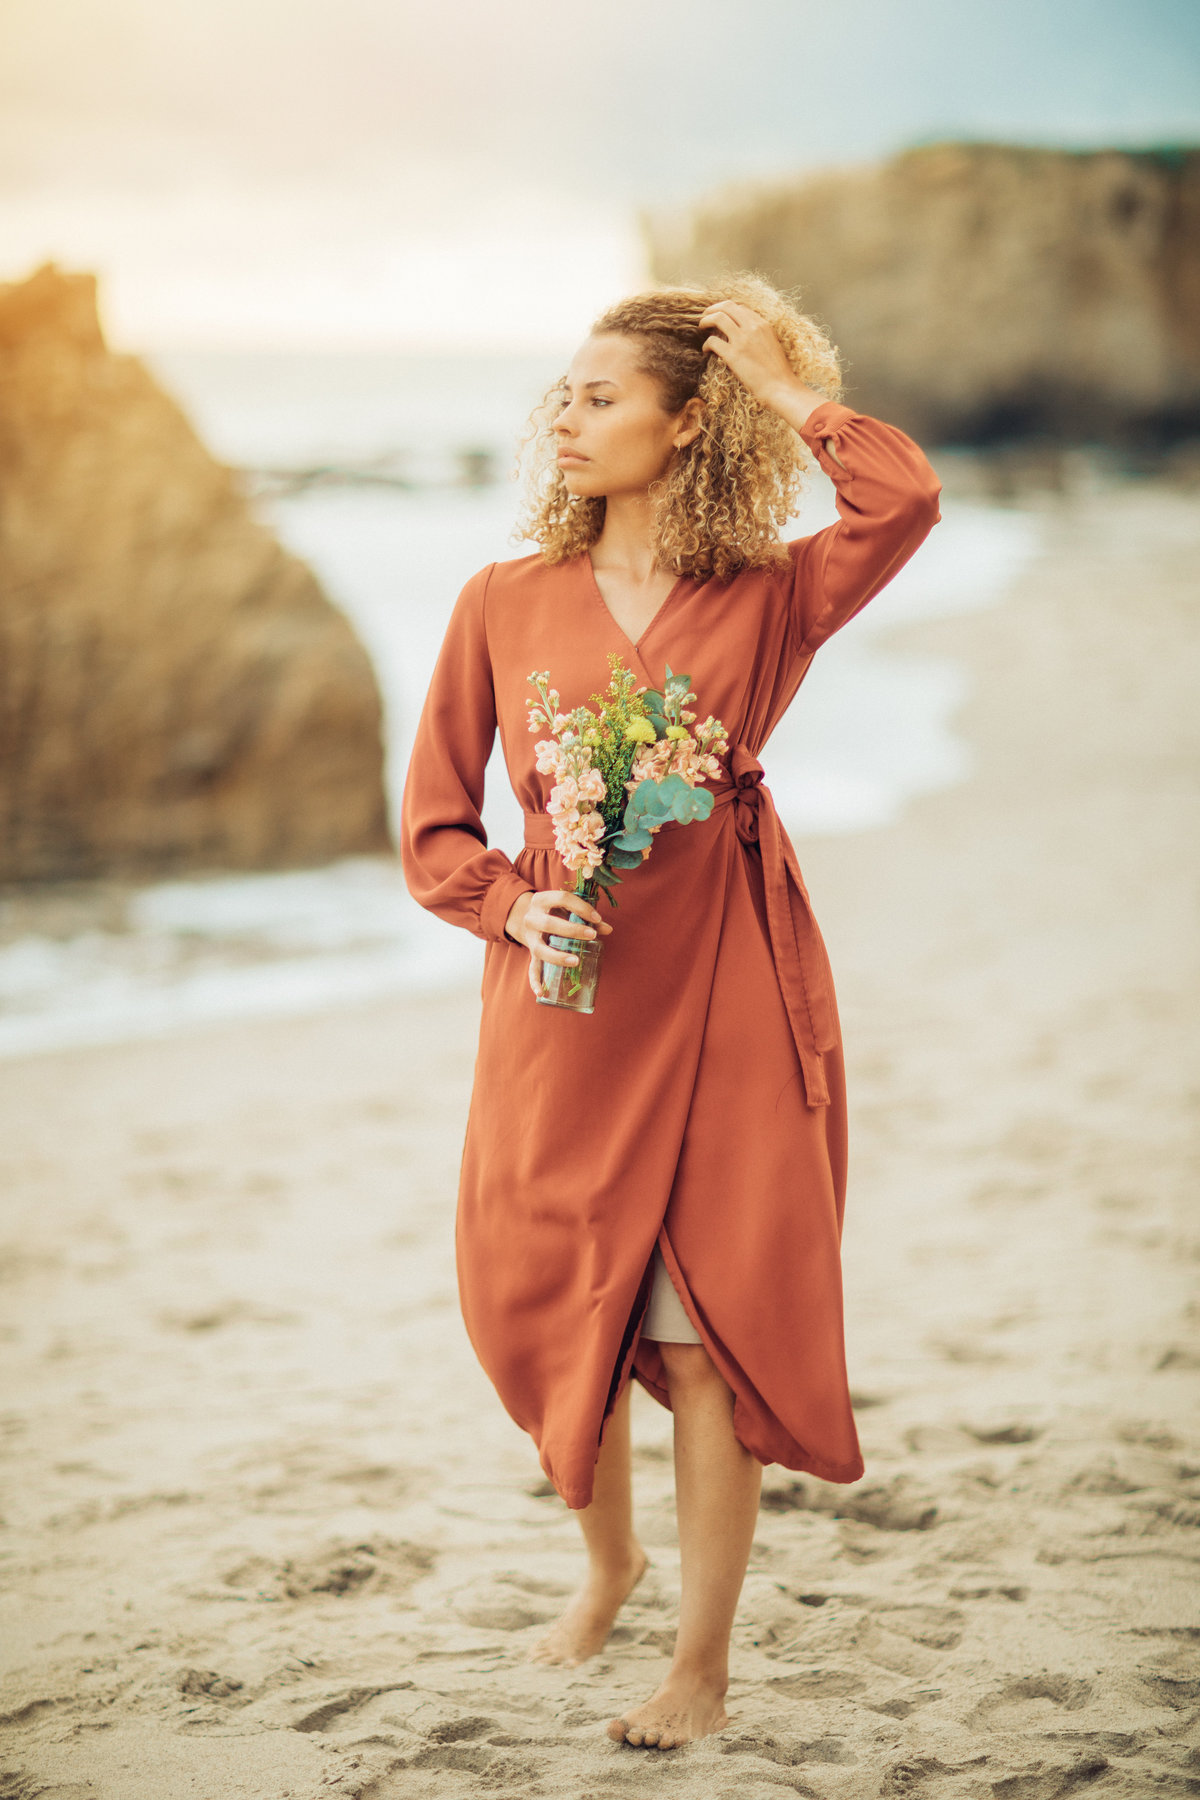 Portrait Photo Of Young Black Woman In Dress Walking On The Shore Los Angeles